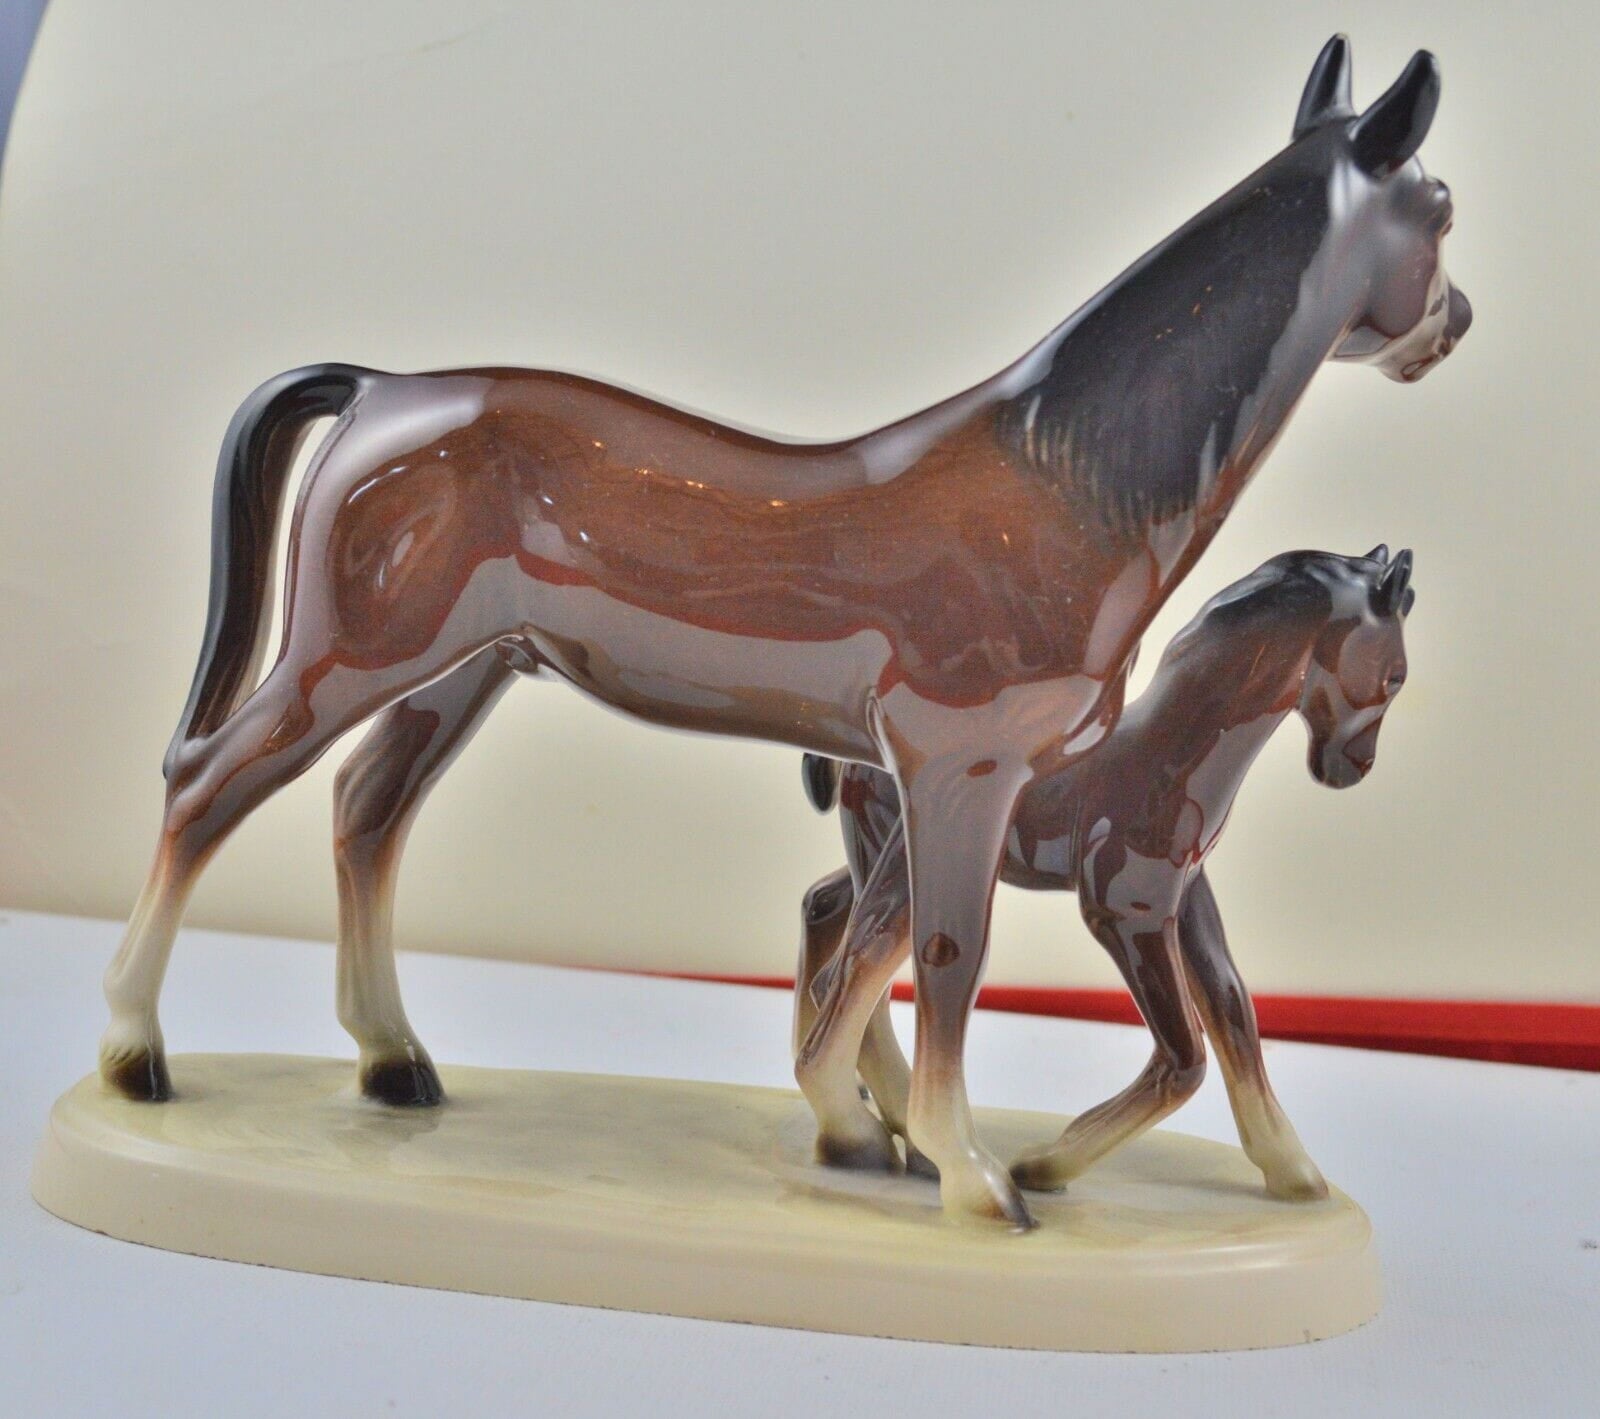 VINTAGE HERTWIG KATZHUTTE HORSE FIGURINE MARE AND FOAL - TMD167207